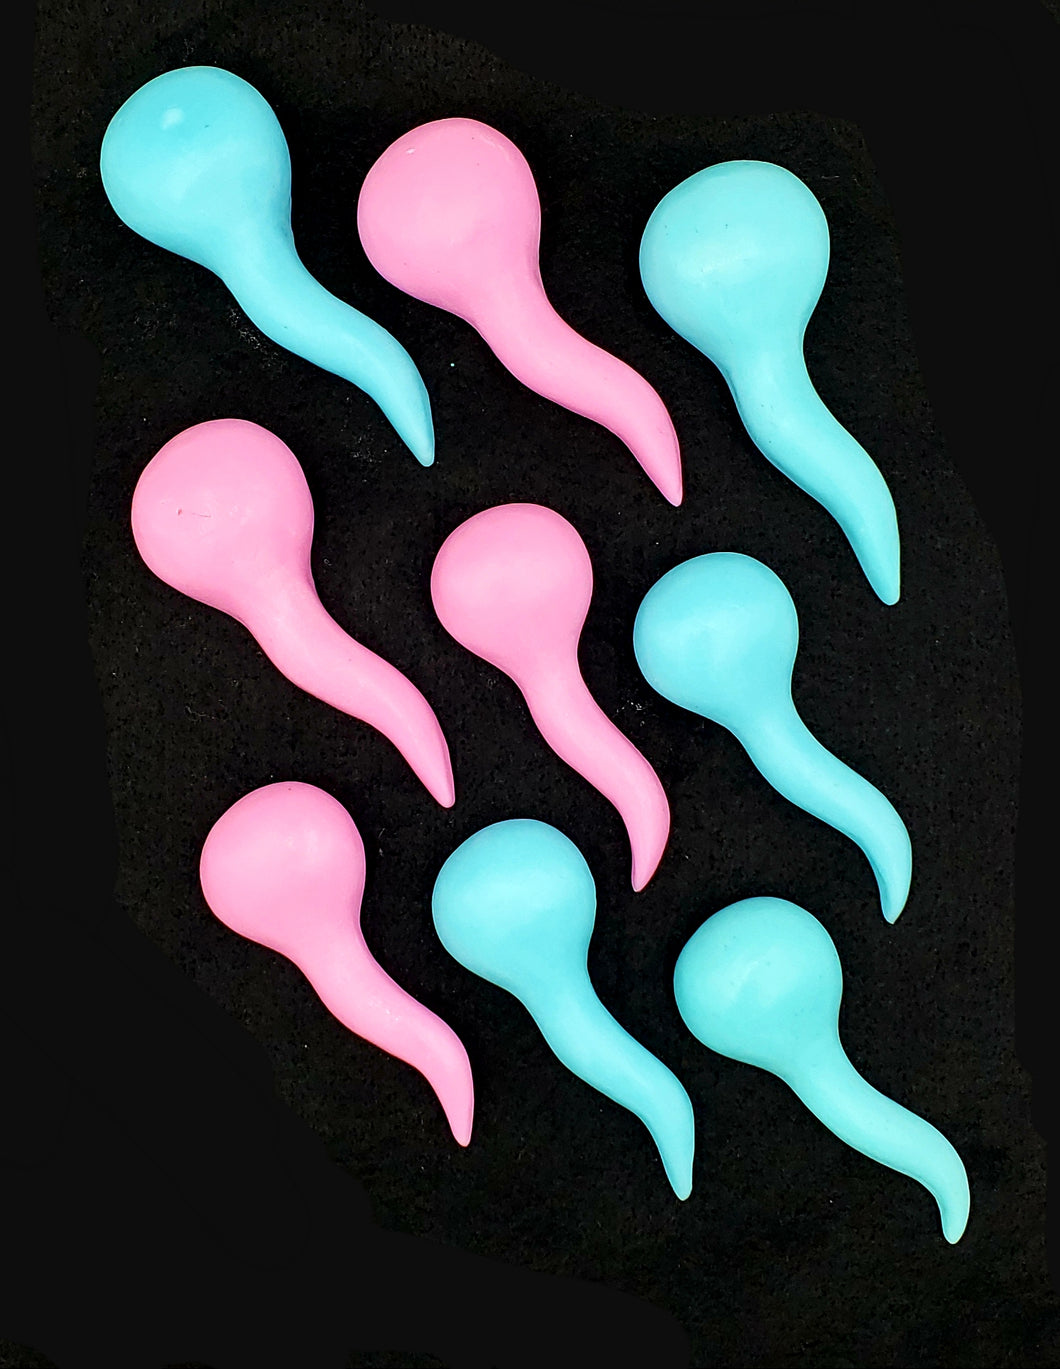 Sperm 'Spermies' Assorted Color Soaps - Gender Reveal - It's a Boy or It's a Girl Whimsical Soaps It's the Bomb Sperm Pink & Blue 'Spermies' Cute Gift Can  